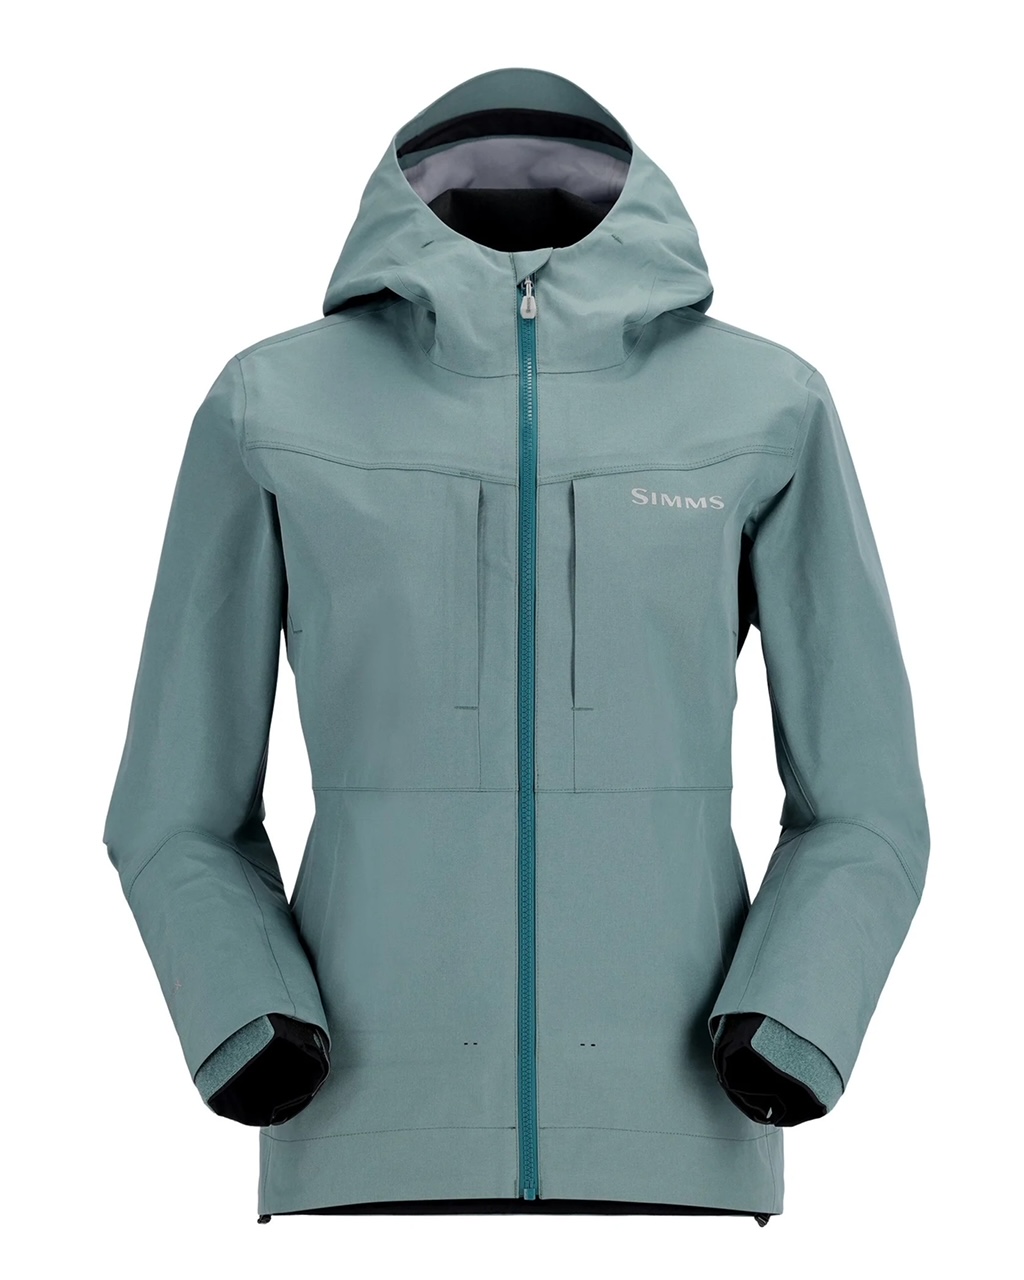 Simms W's G3 Guide Fishing Jacket - Avalon Teal - Large